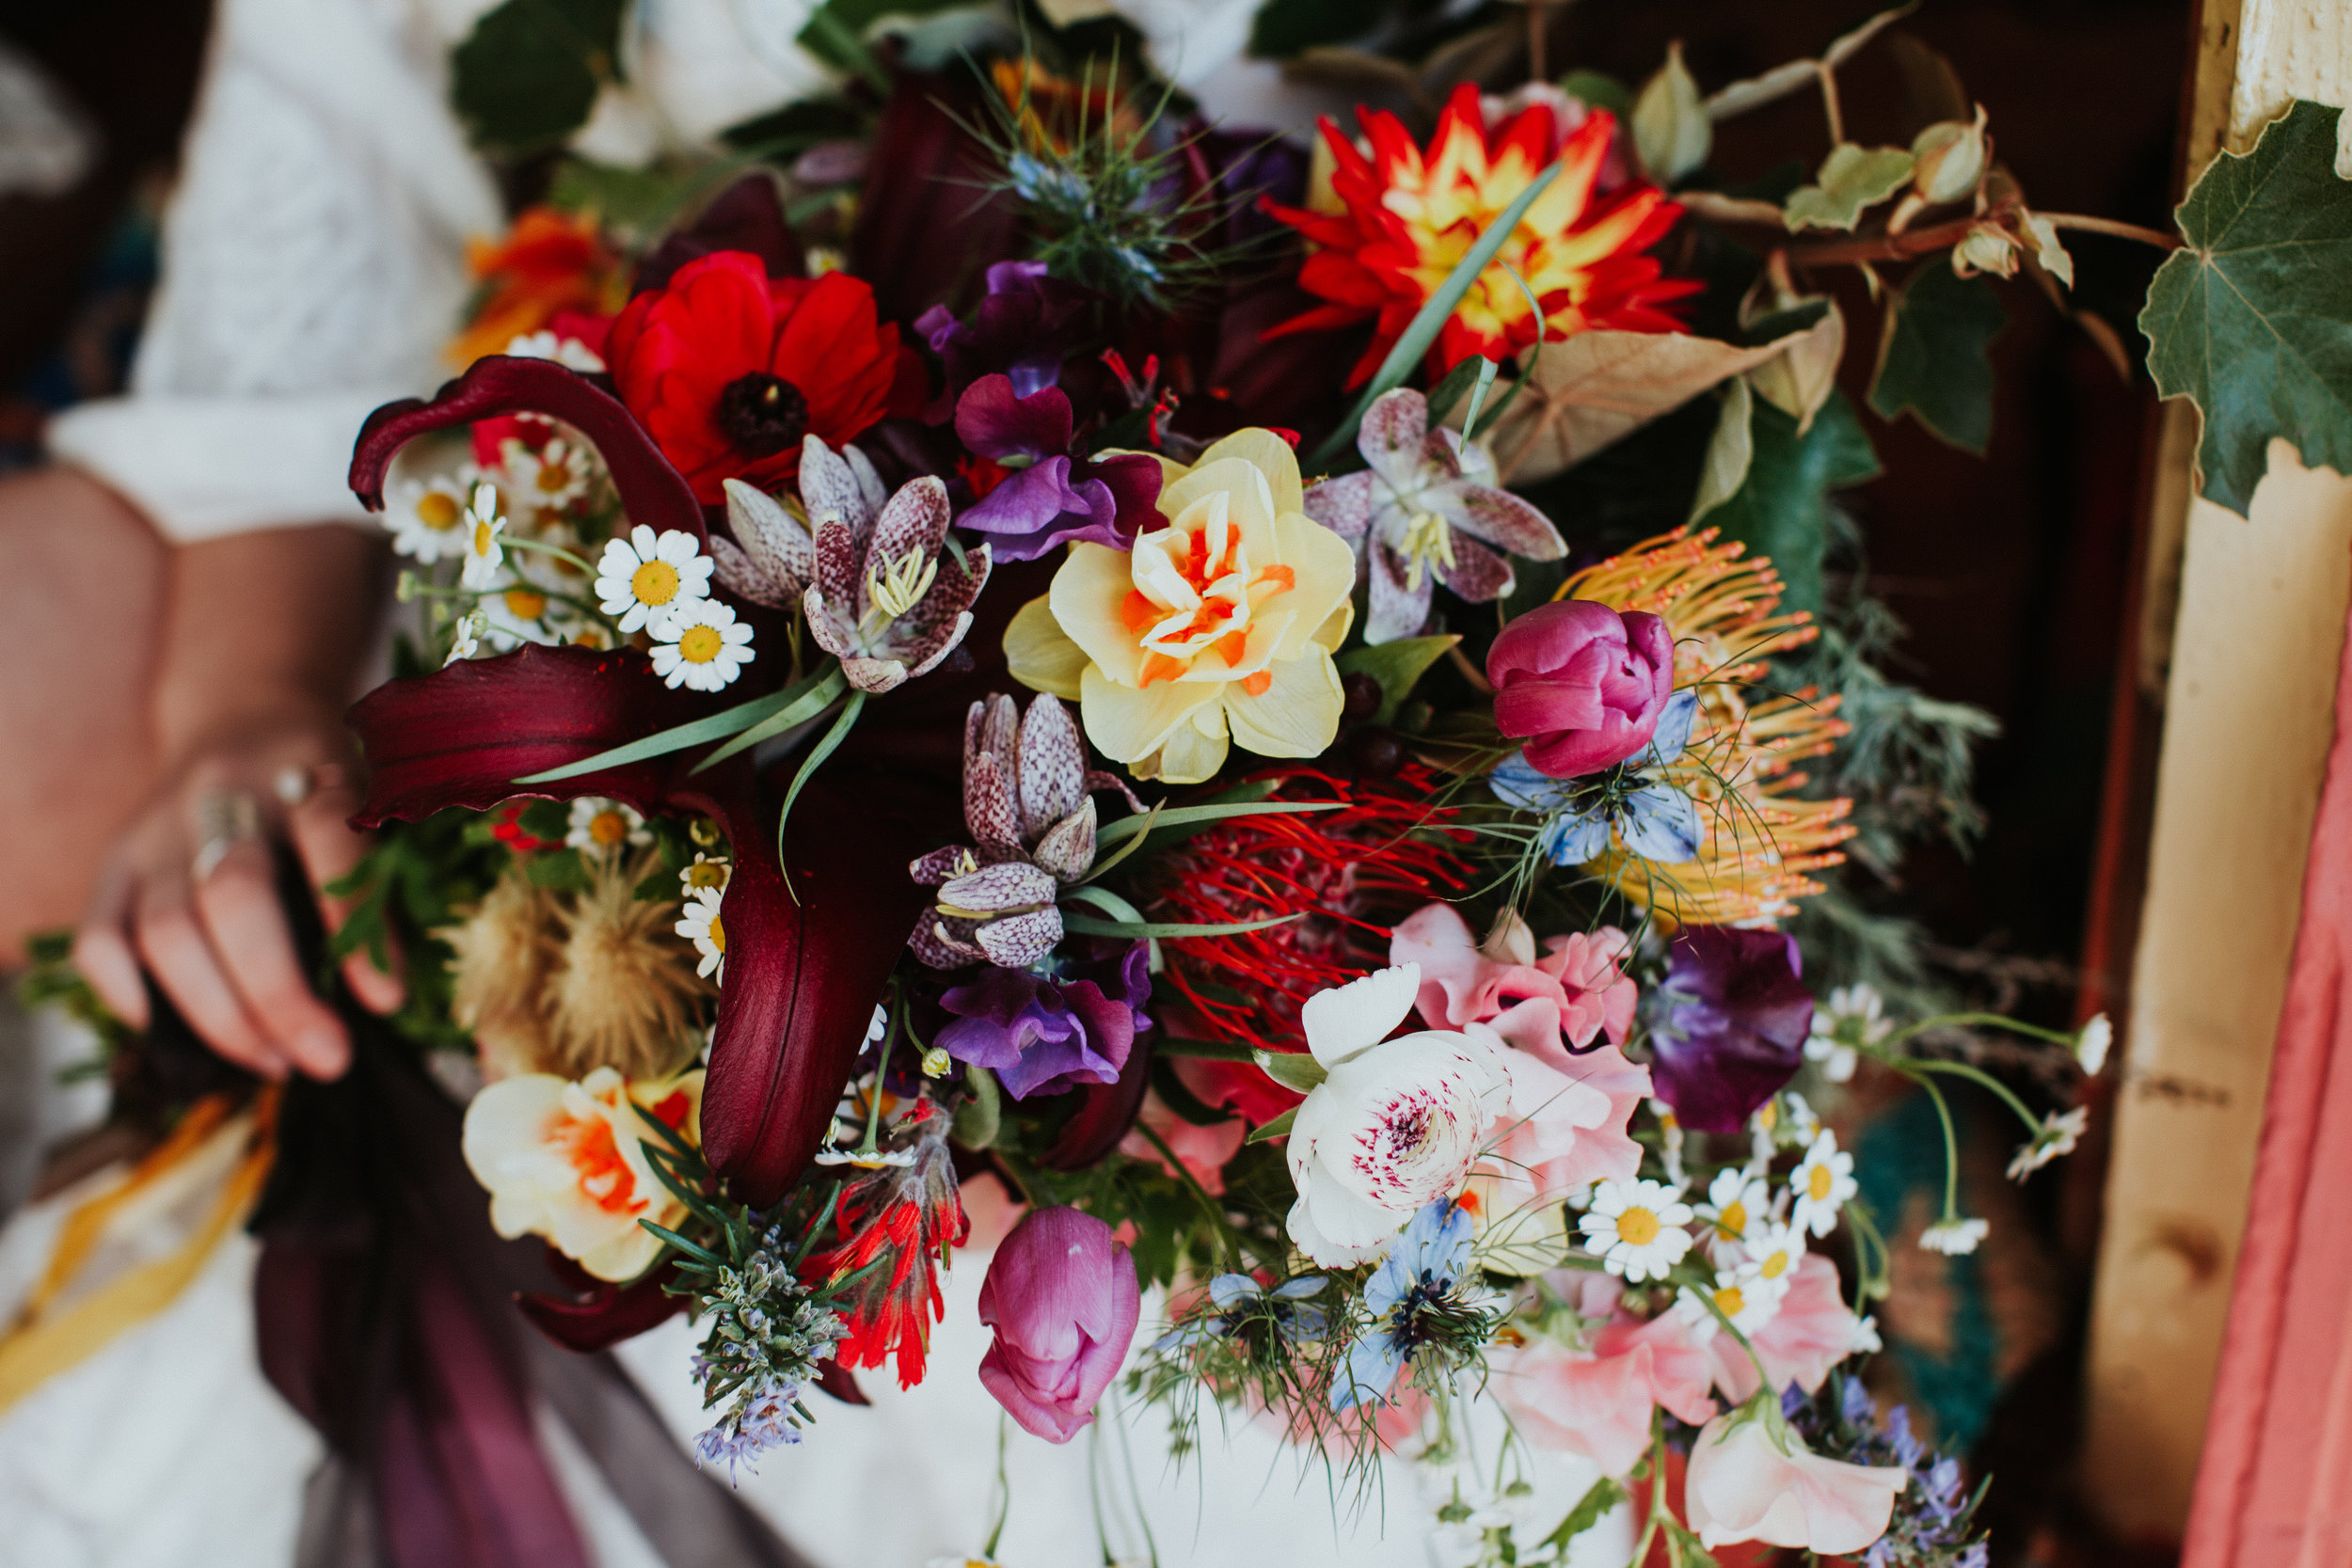 Wild and market finds bridal bouquet